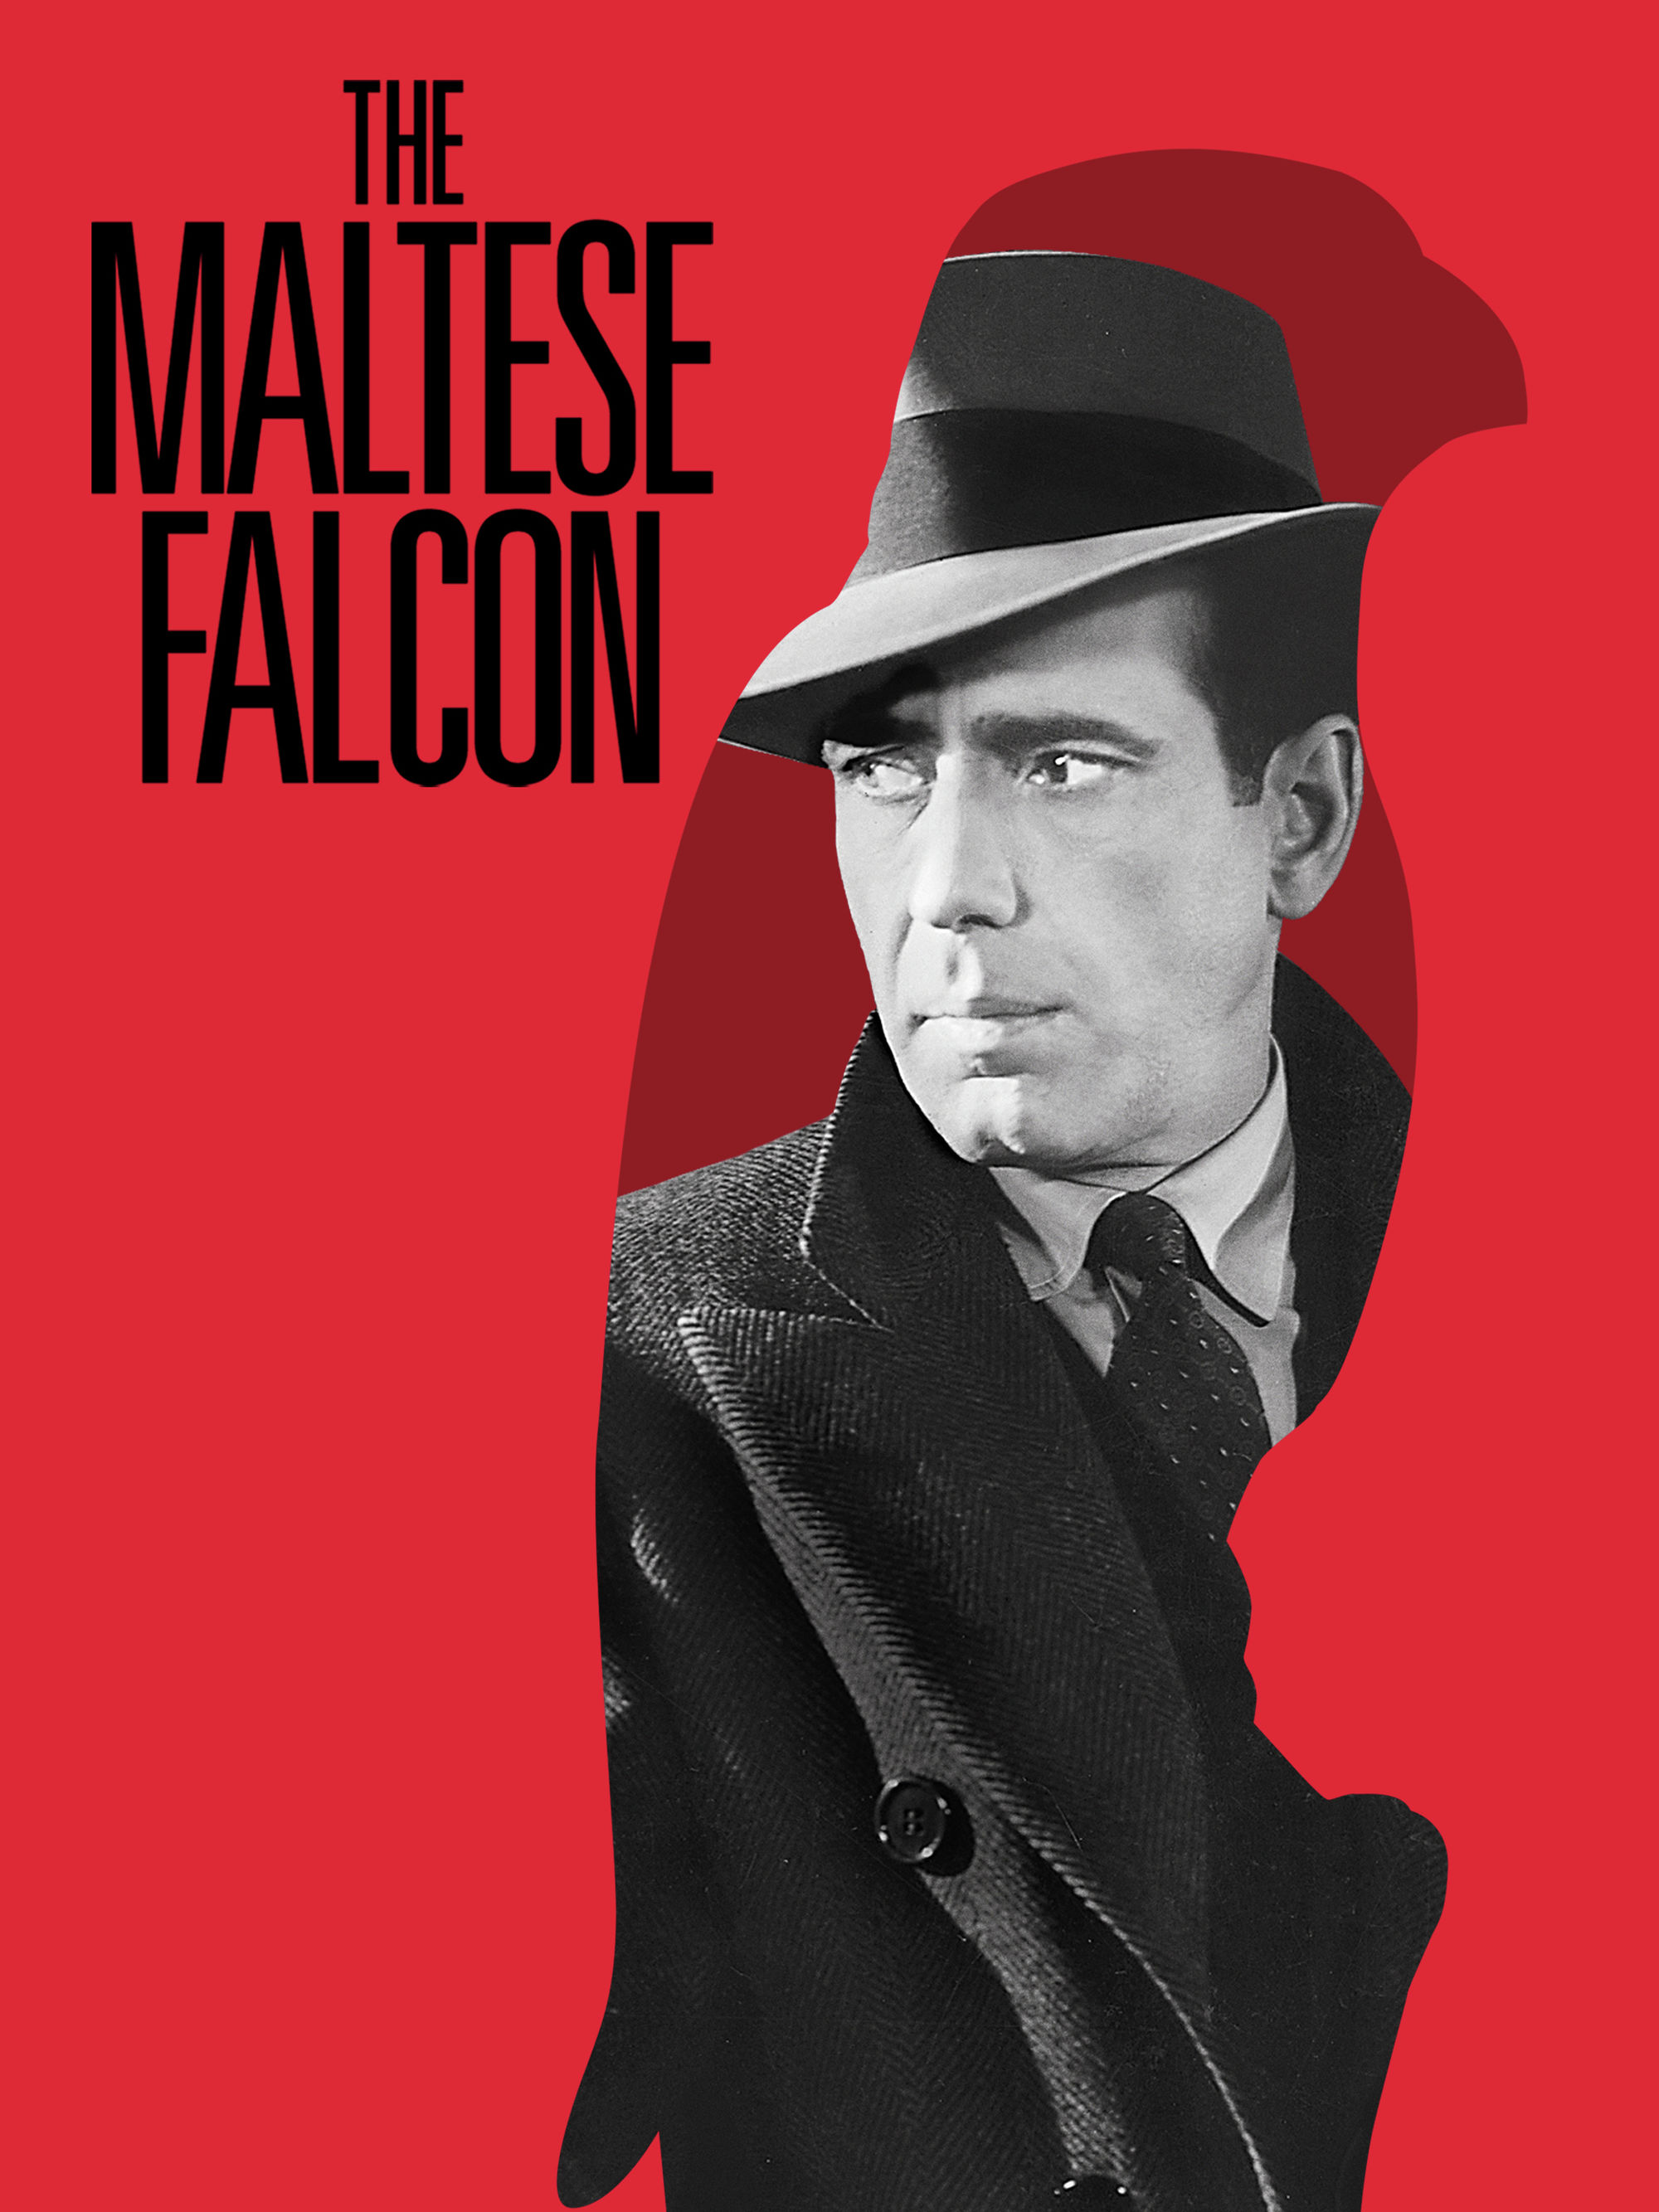 The Maltese Falcon - DVD [ 1941 ]  - Classic Movies On DVD - Movies On GRUV